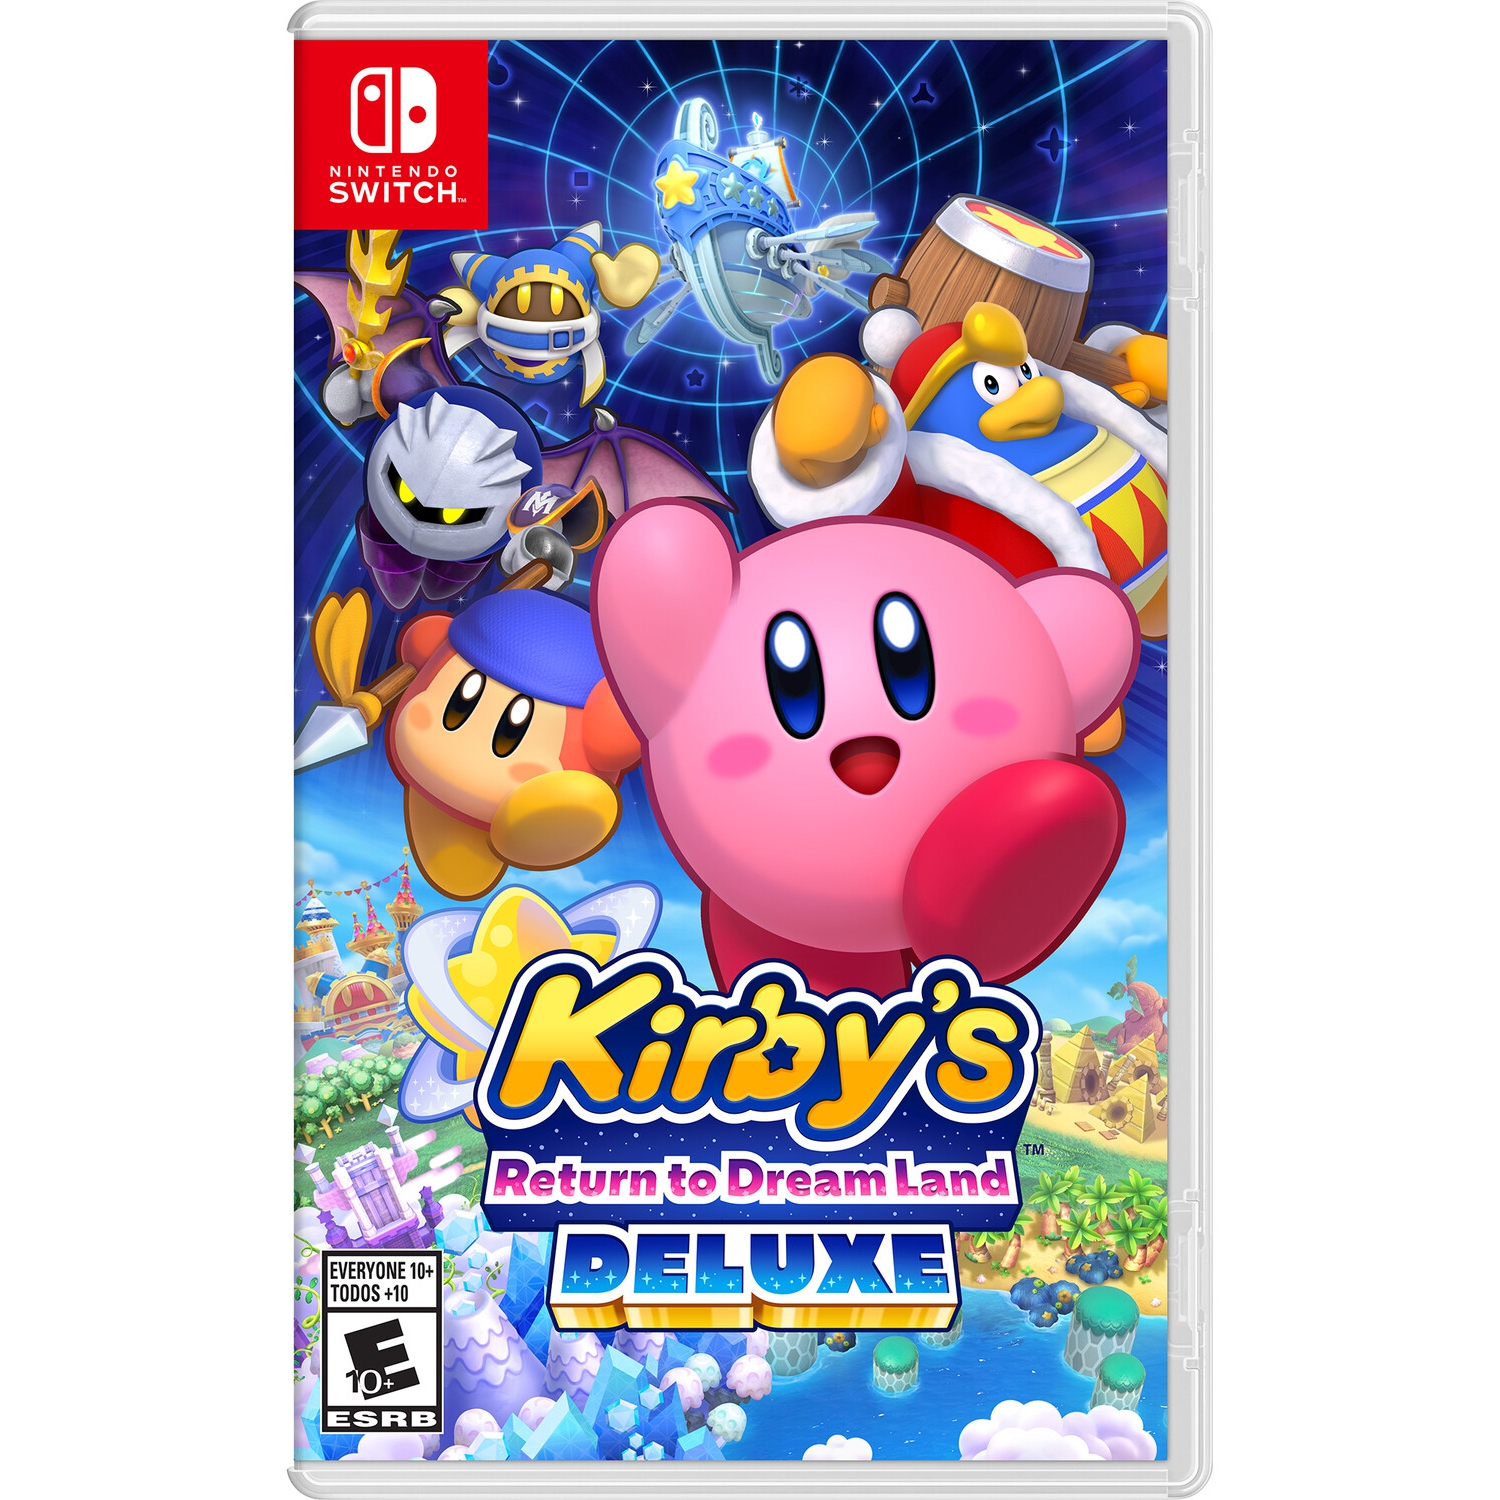 Kirby's Return to Dream Land Deluxe for Nintendo Switch [VIDEOGAMES]